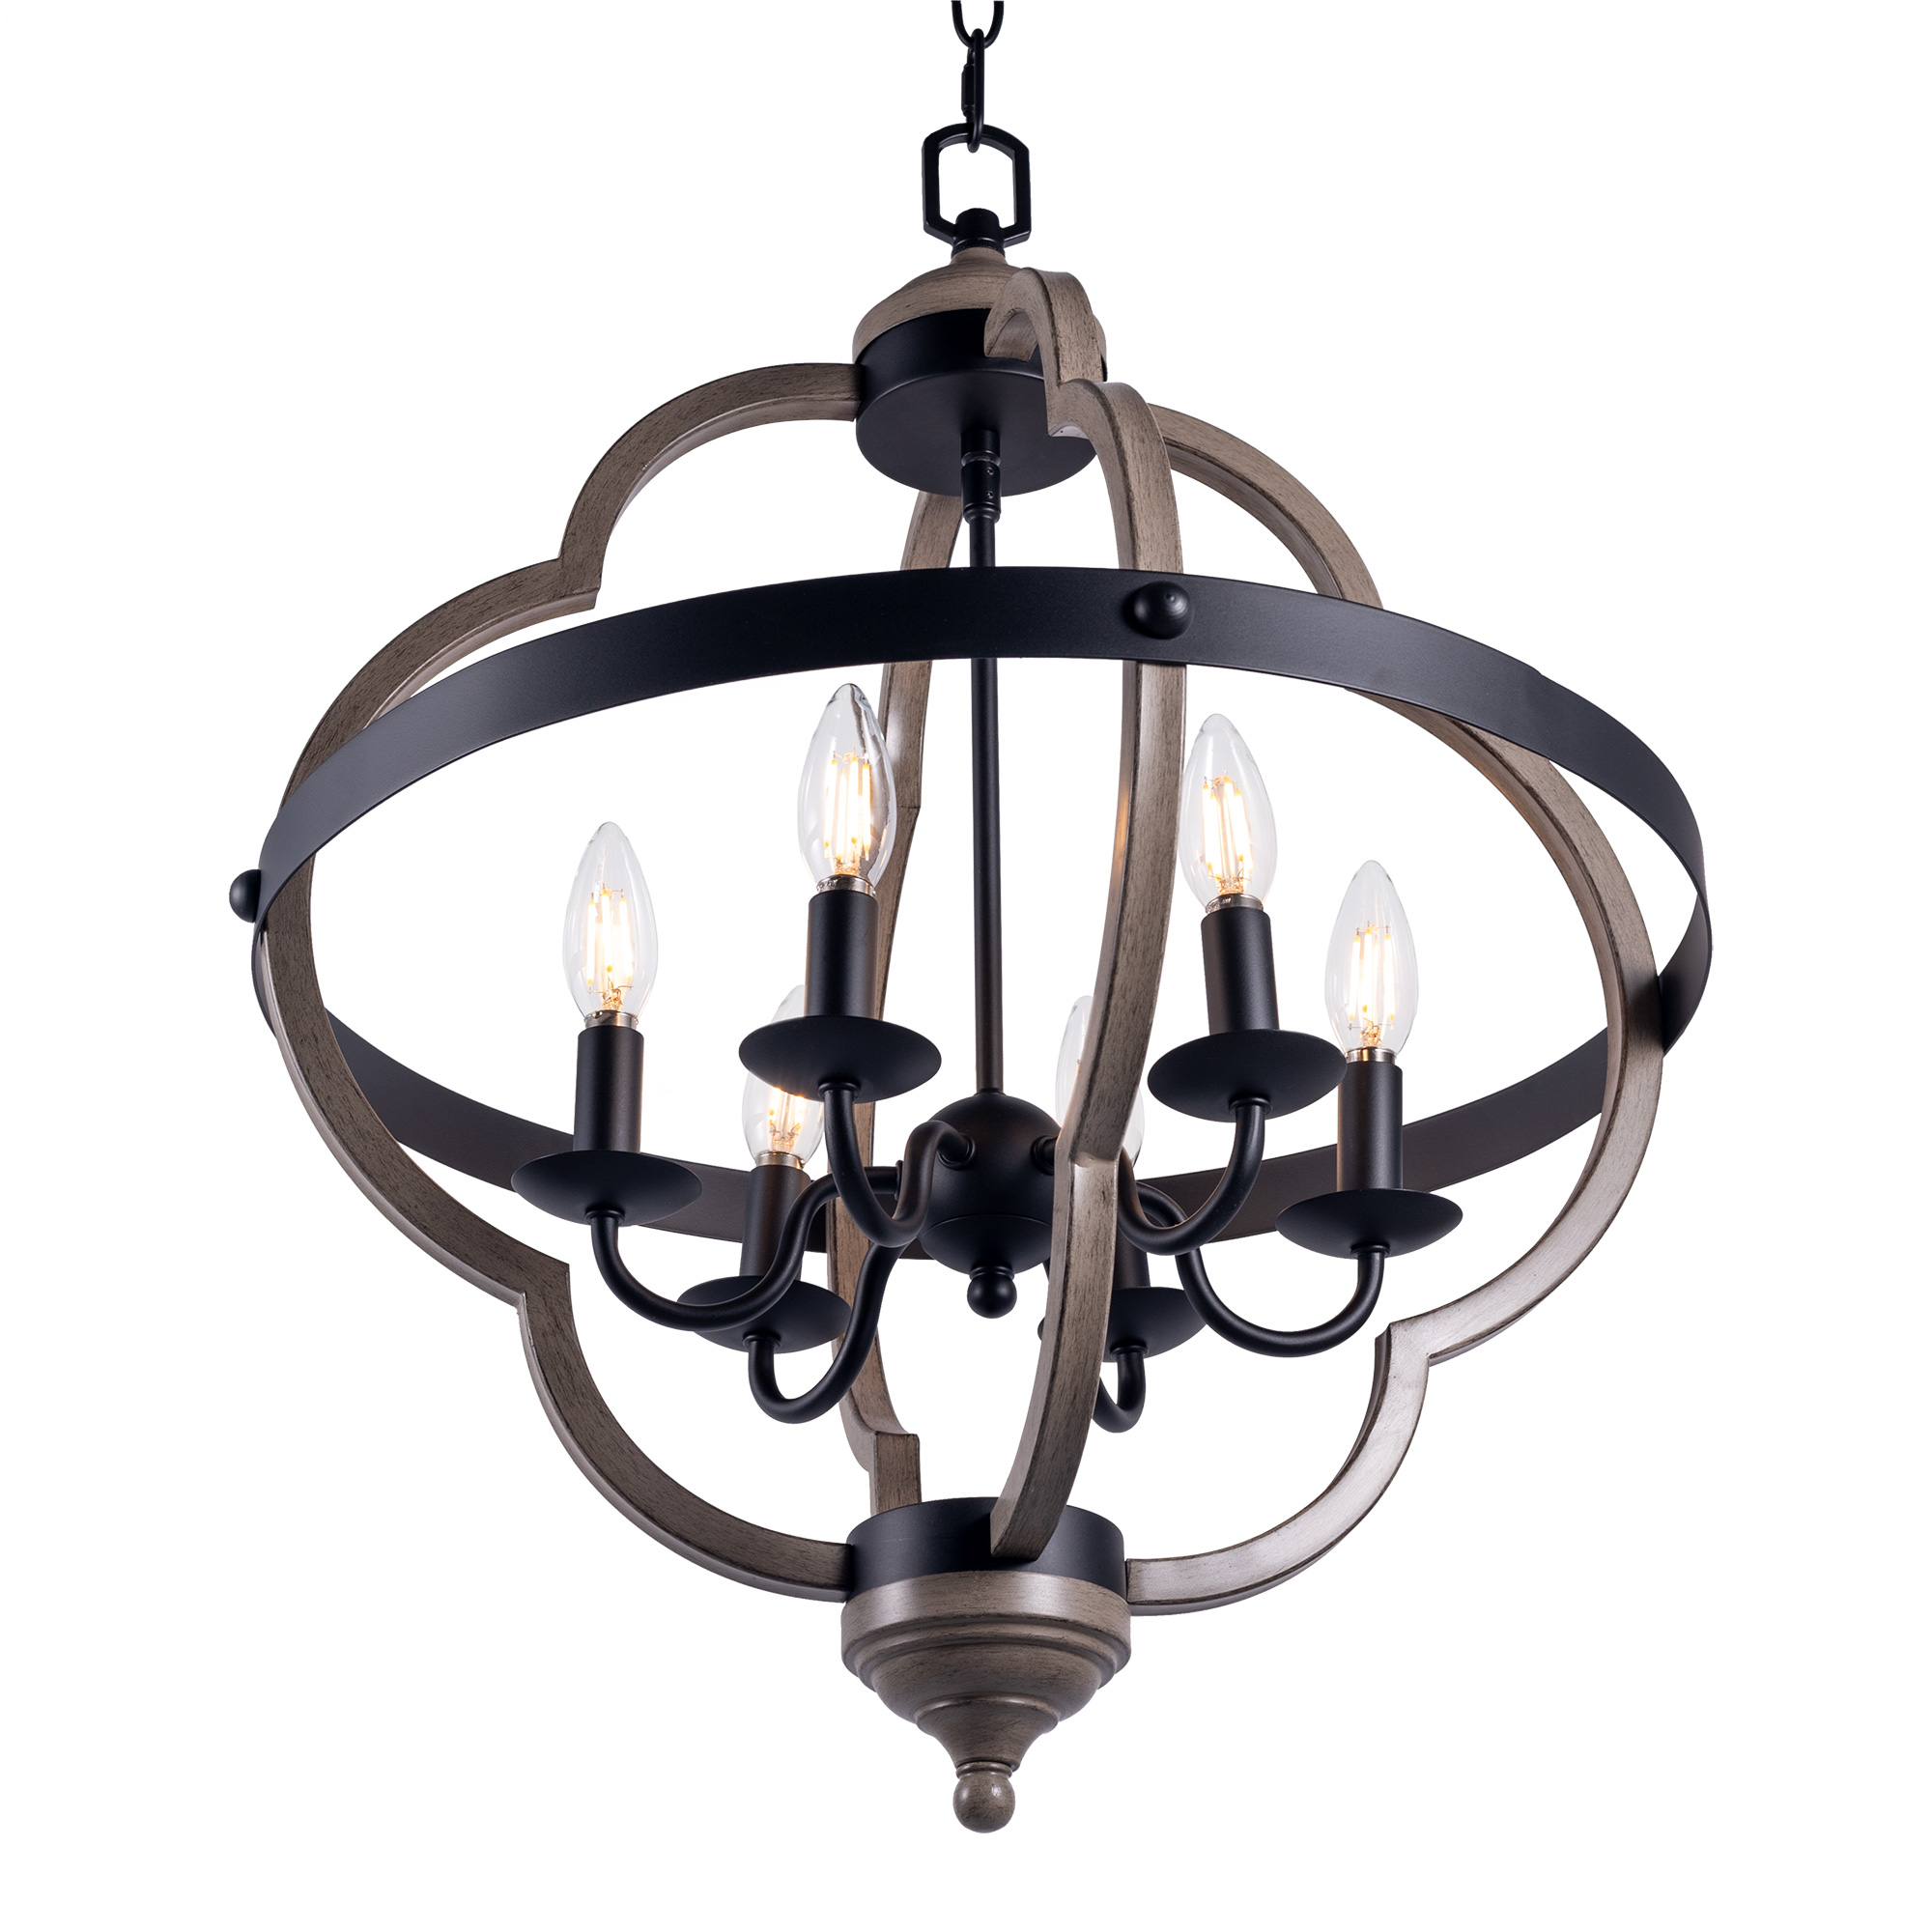 USA-Direct-6-Light-Candle-Style-Geometric-Chandelier-Industrial-Rustic-Indoor-Pendant-Light-Without--1877127-7